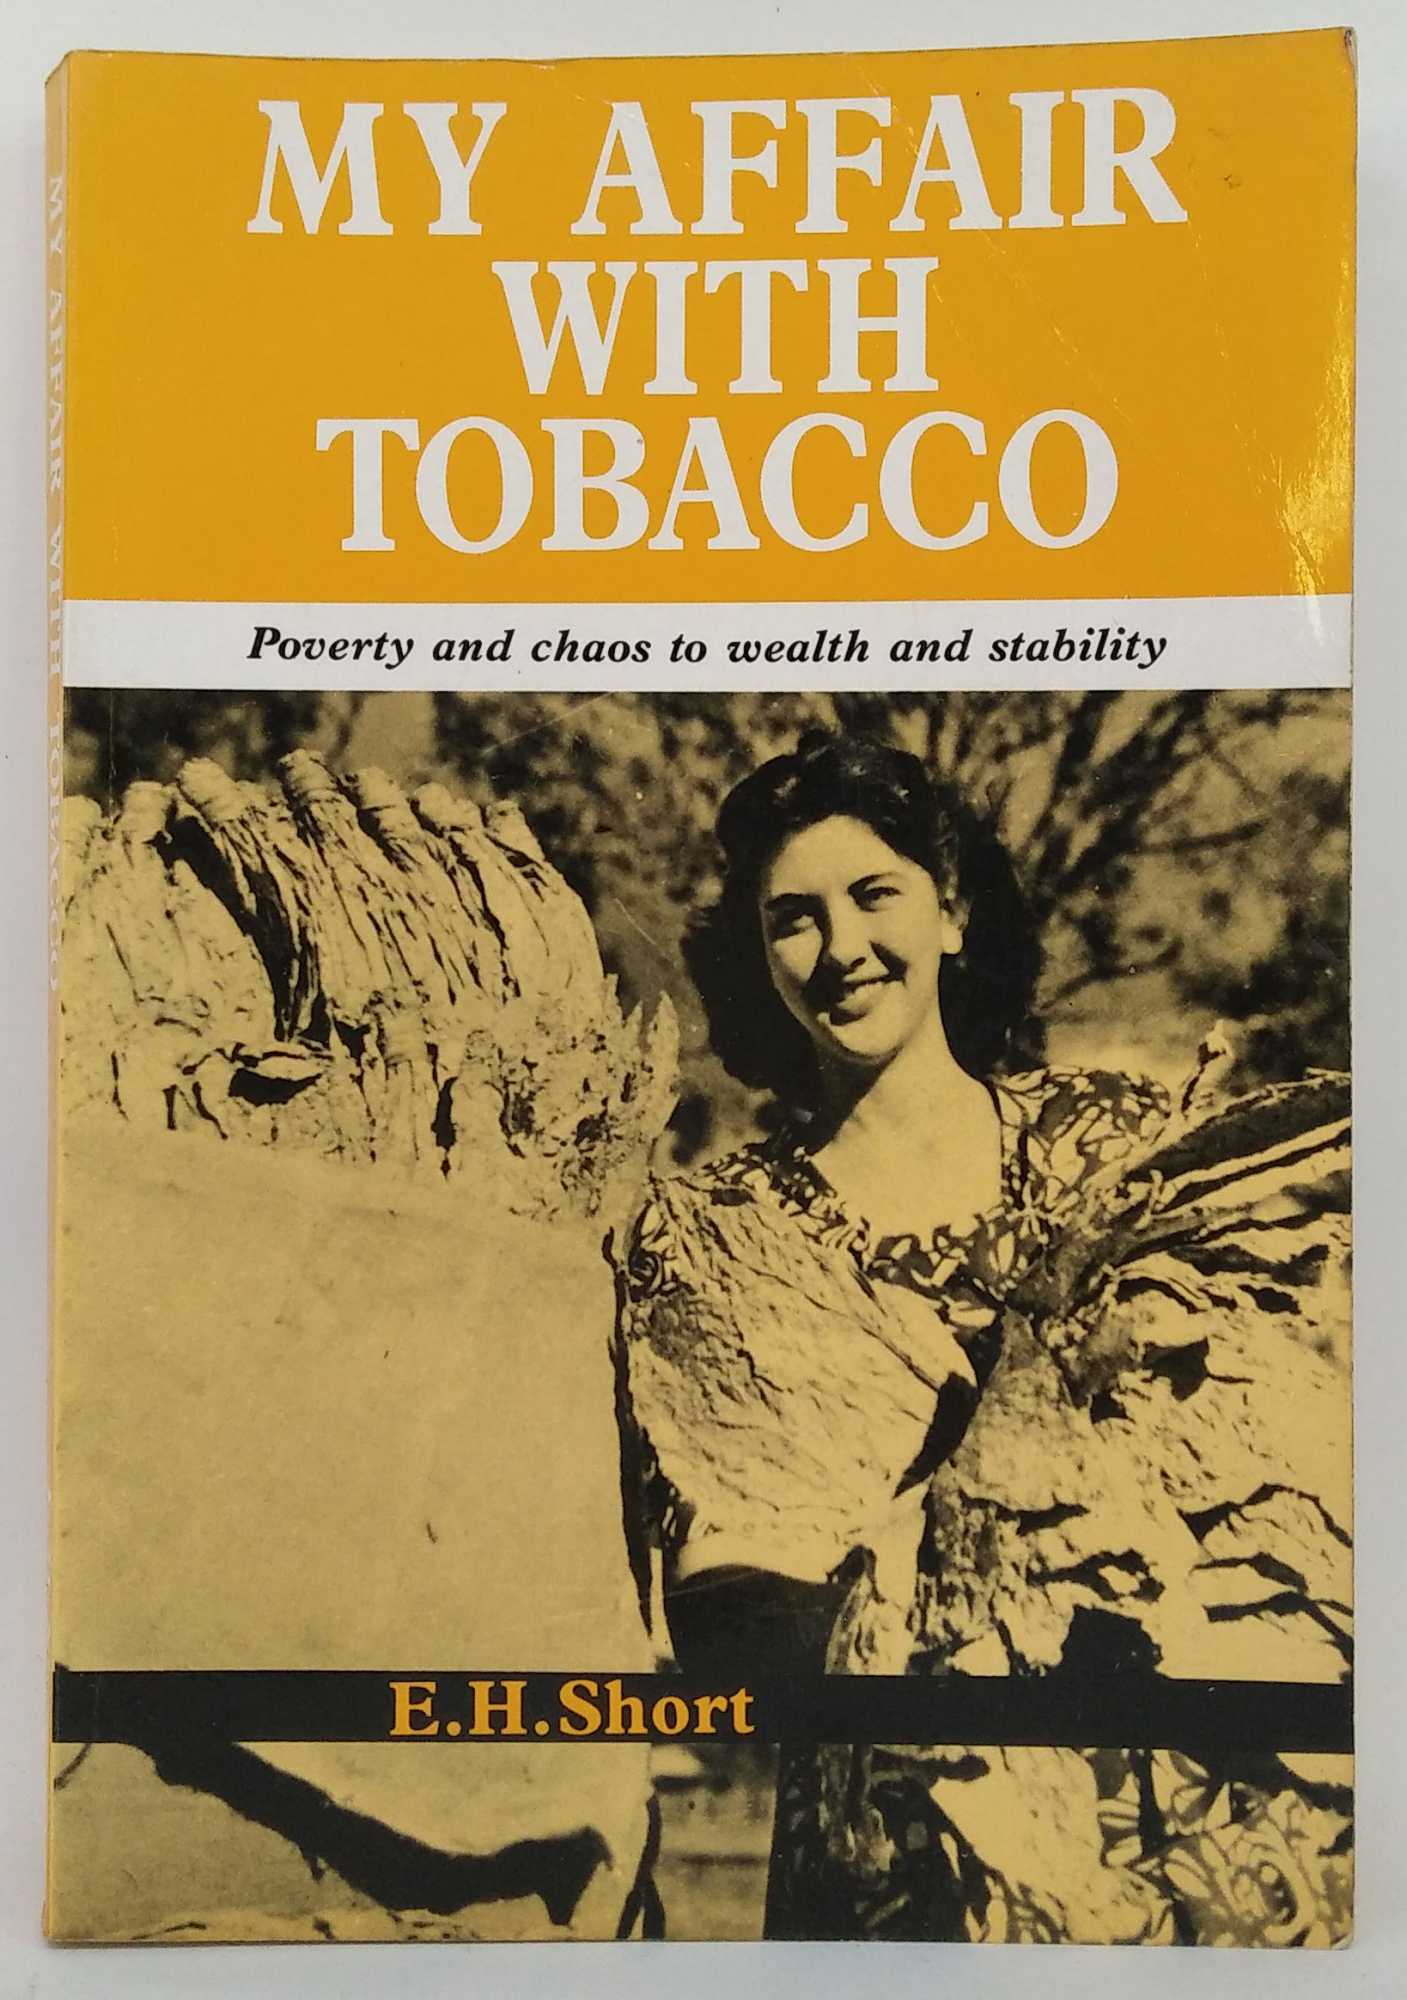 E. H. Short - My Affair with Tobacco: Poverty and Chaos to Wealth and Stability